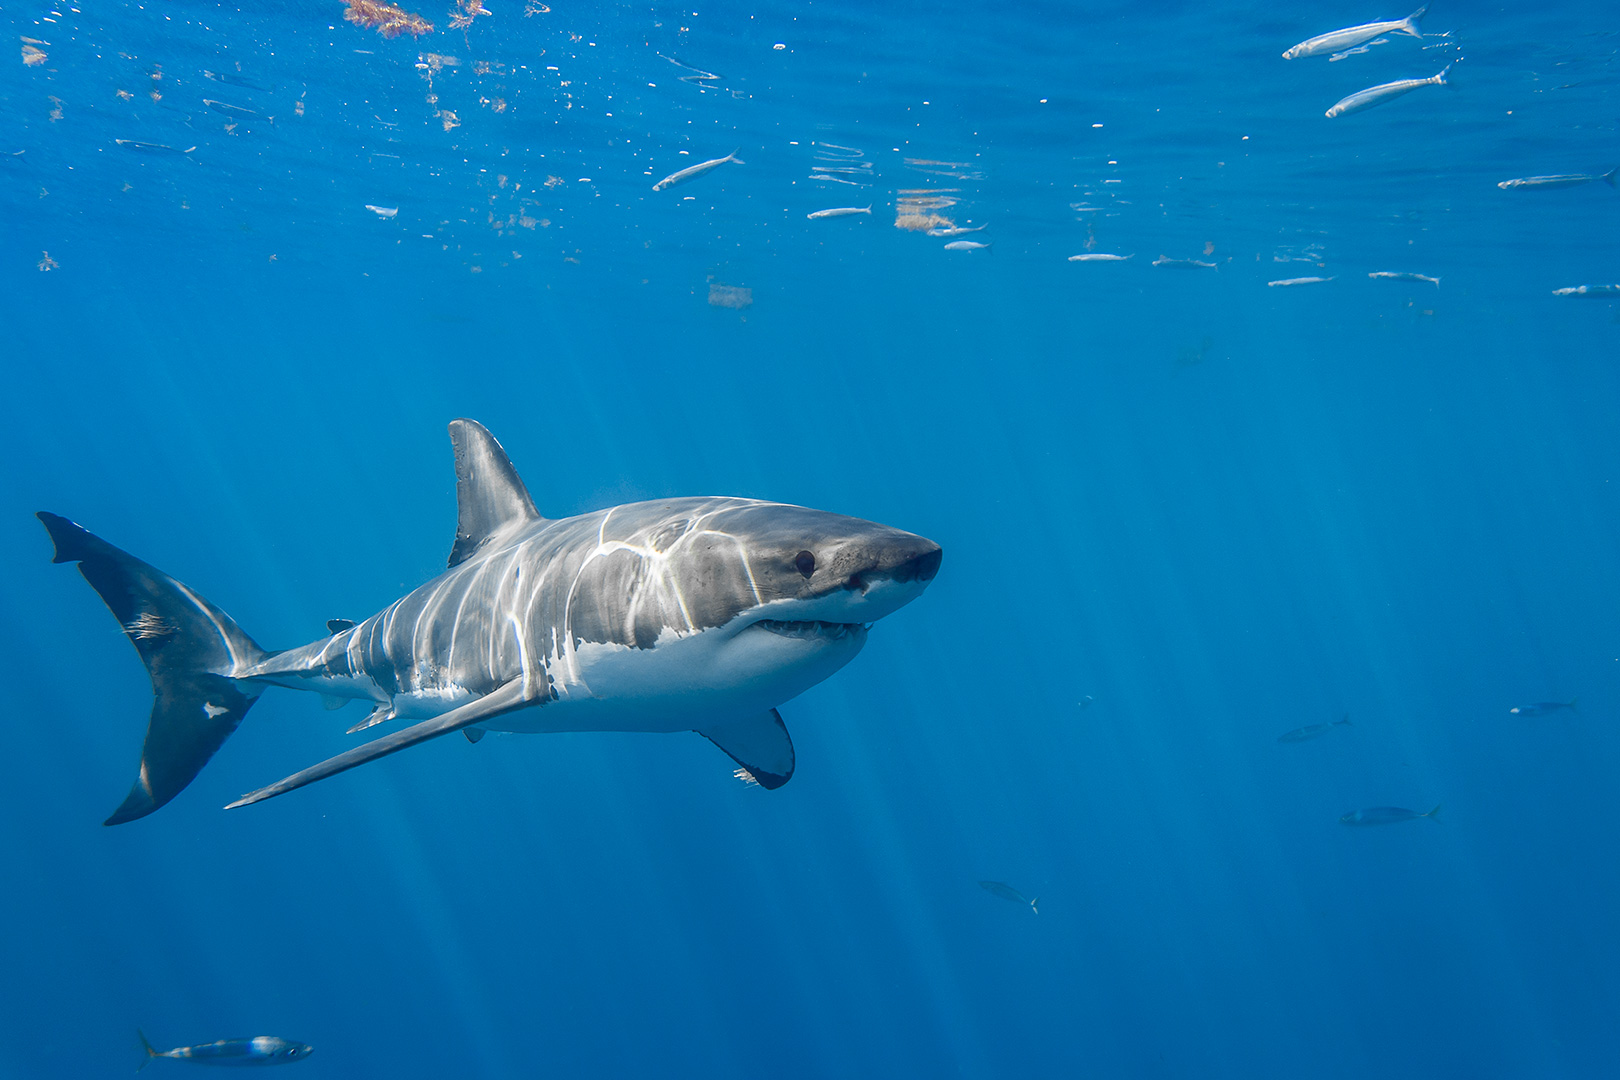 A young male great white shark image